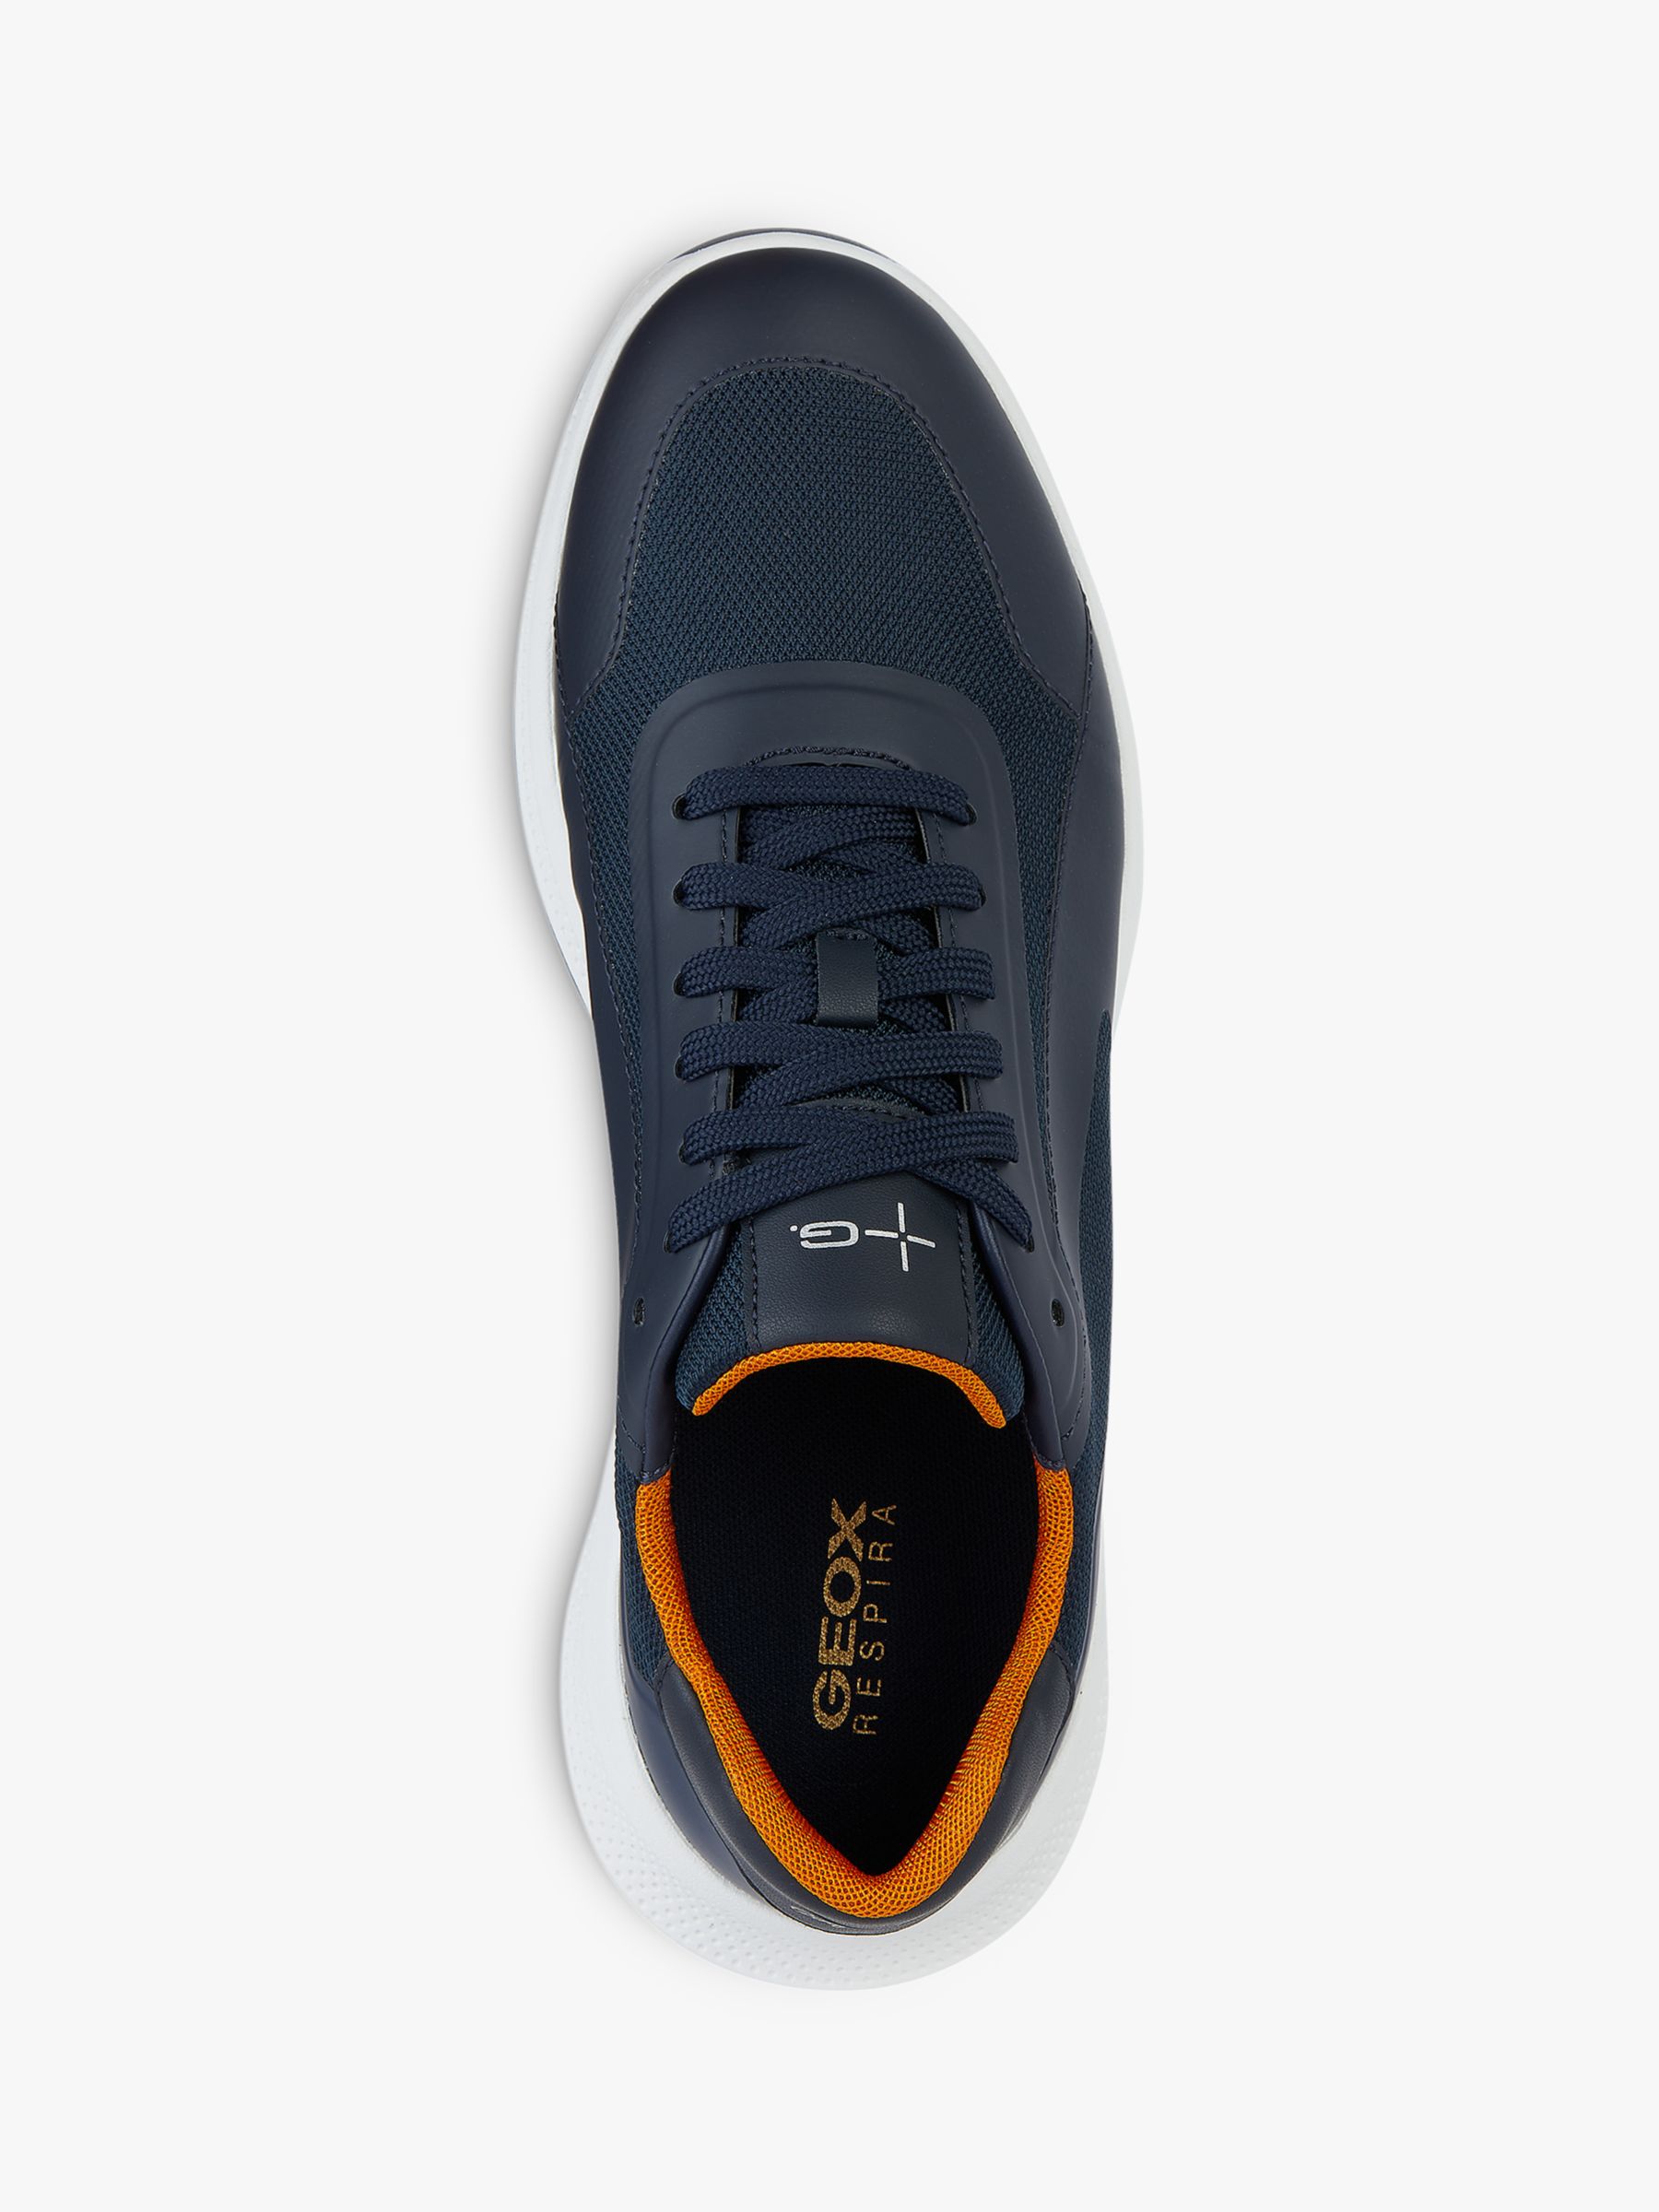 Buy Geox PG1X B Trainers Online at johnlewis.com